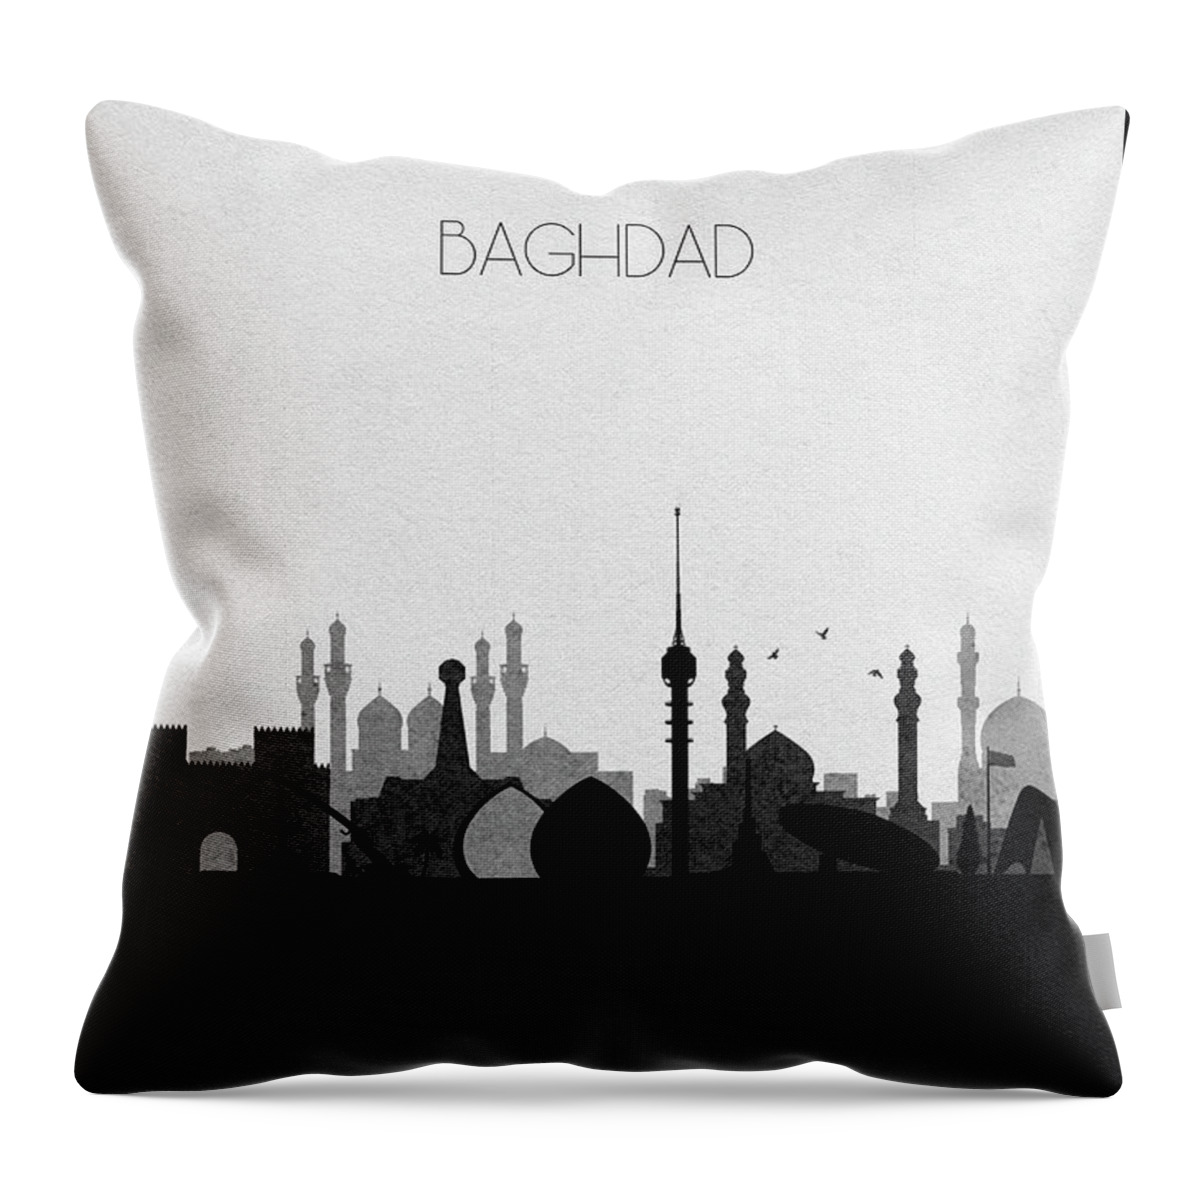 Baghdad Throw Pillow featuring the mixed media Baghdad Cityscape by Inspirowl Design